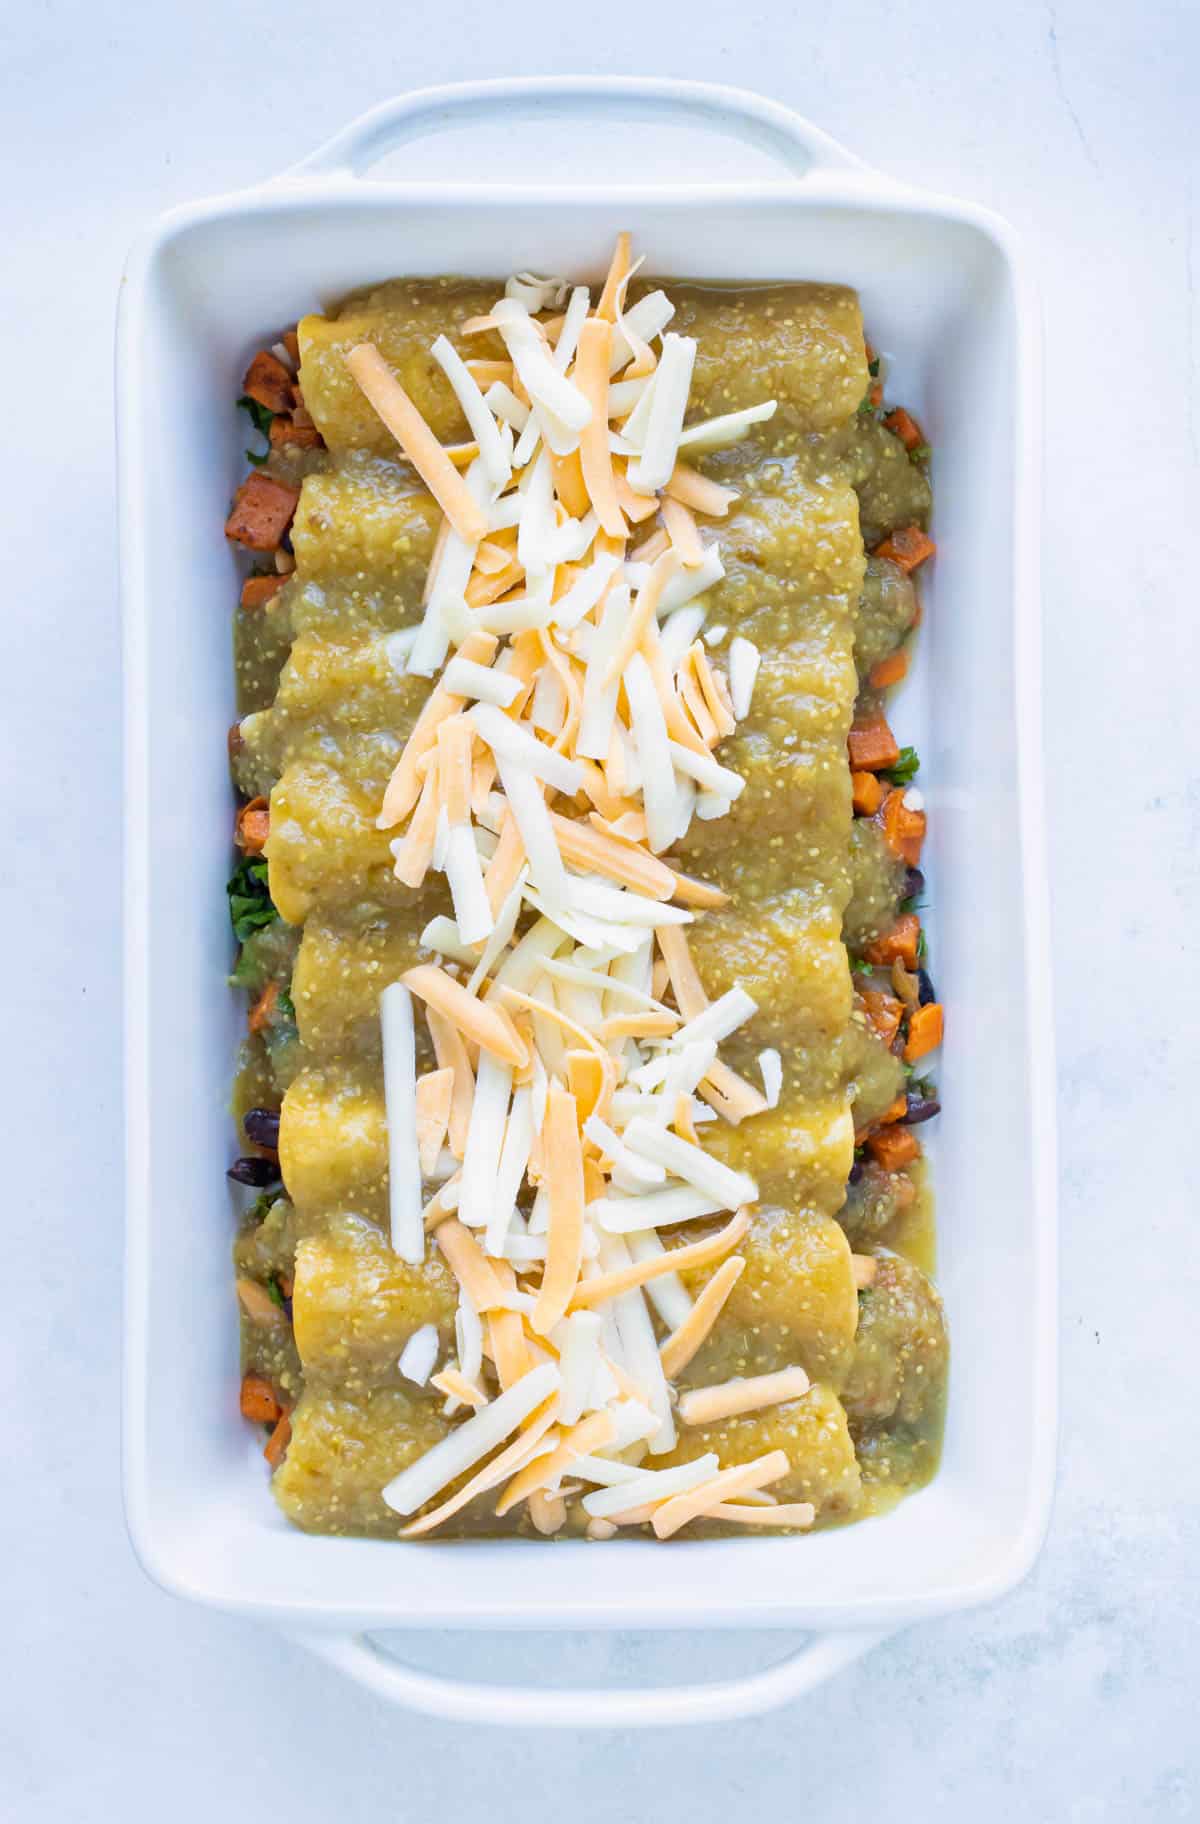 Enchiladas are covered with salsa and cheese is added before baking.